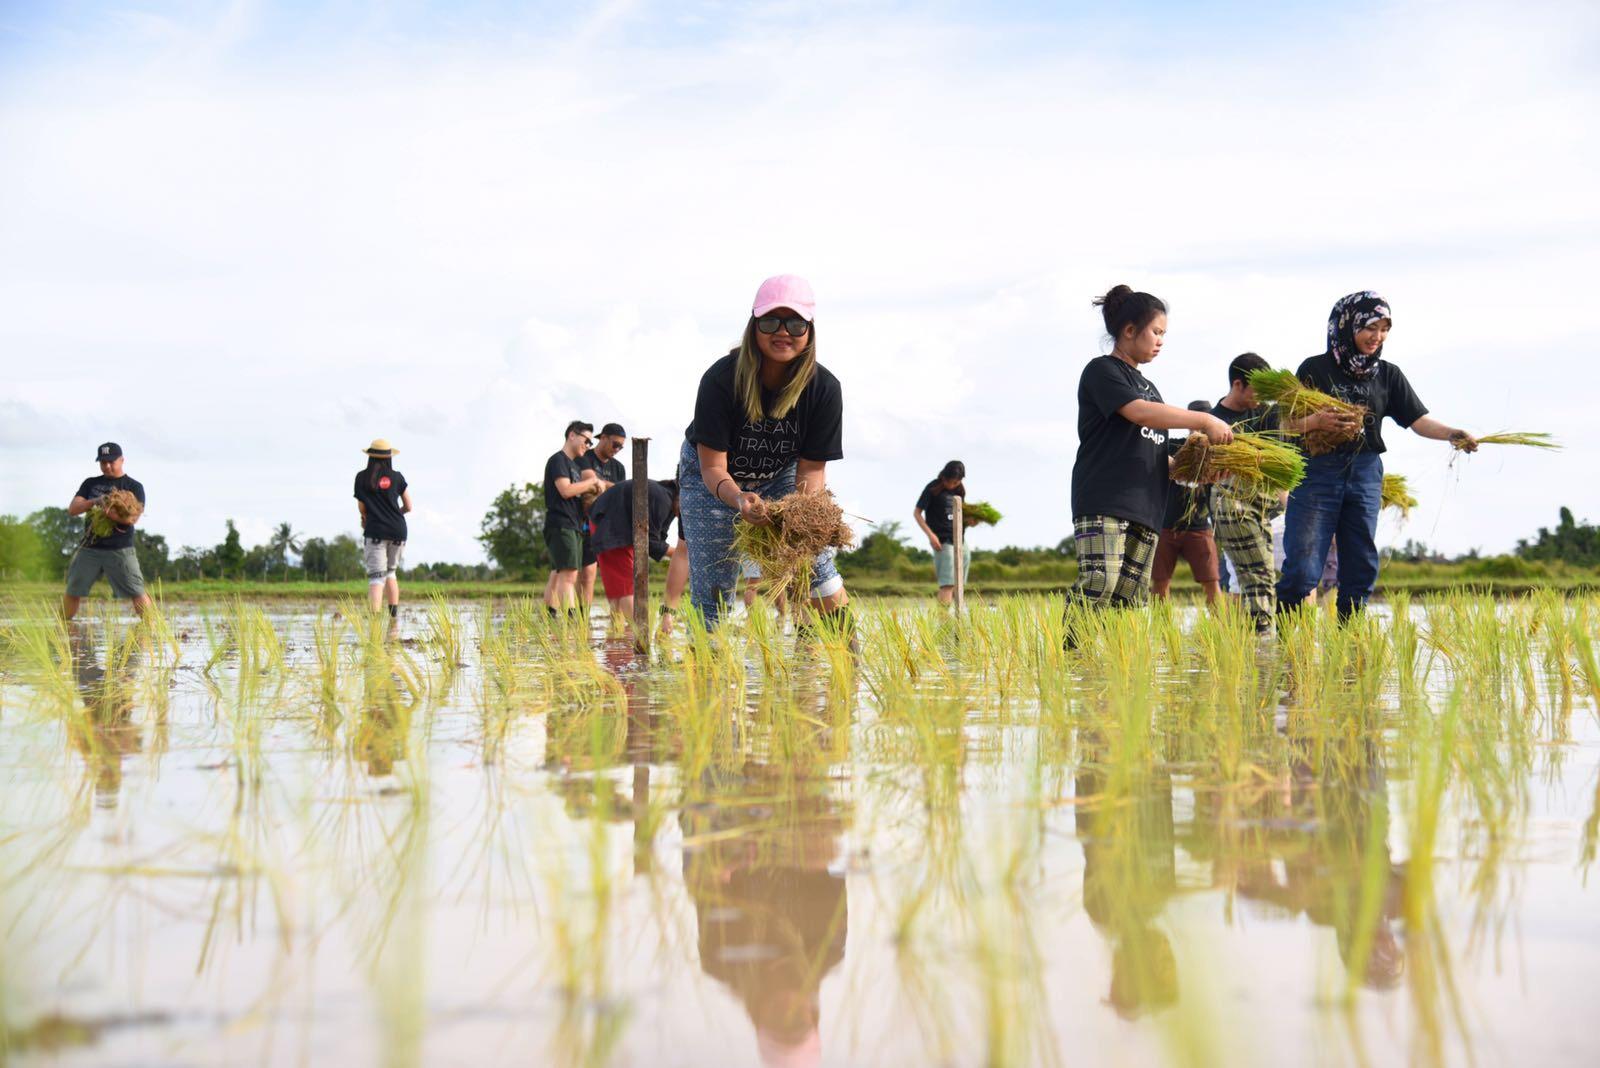 Journalists across Southeast Asia plant sang yod rice paddies as part of the activities of the ASEAN Travel Journo Camp organized by the Thai Journalists Association in partnership with Thai AirAsia. Photo: Supawas Inthip/Thai AirAsia. 